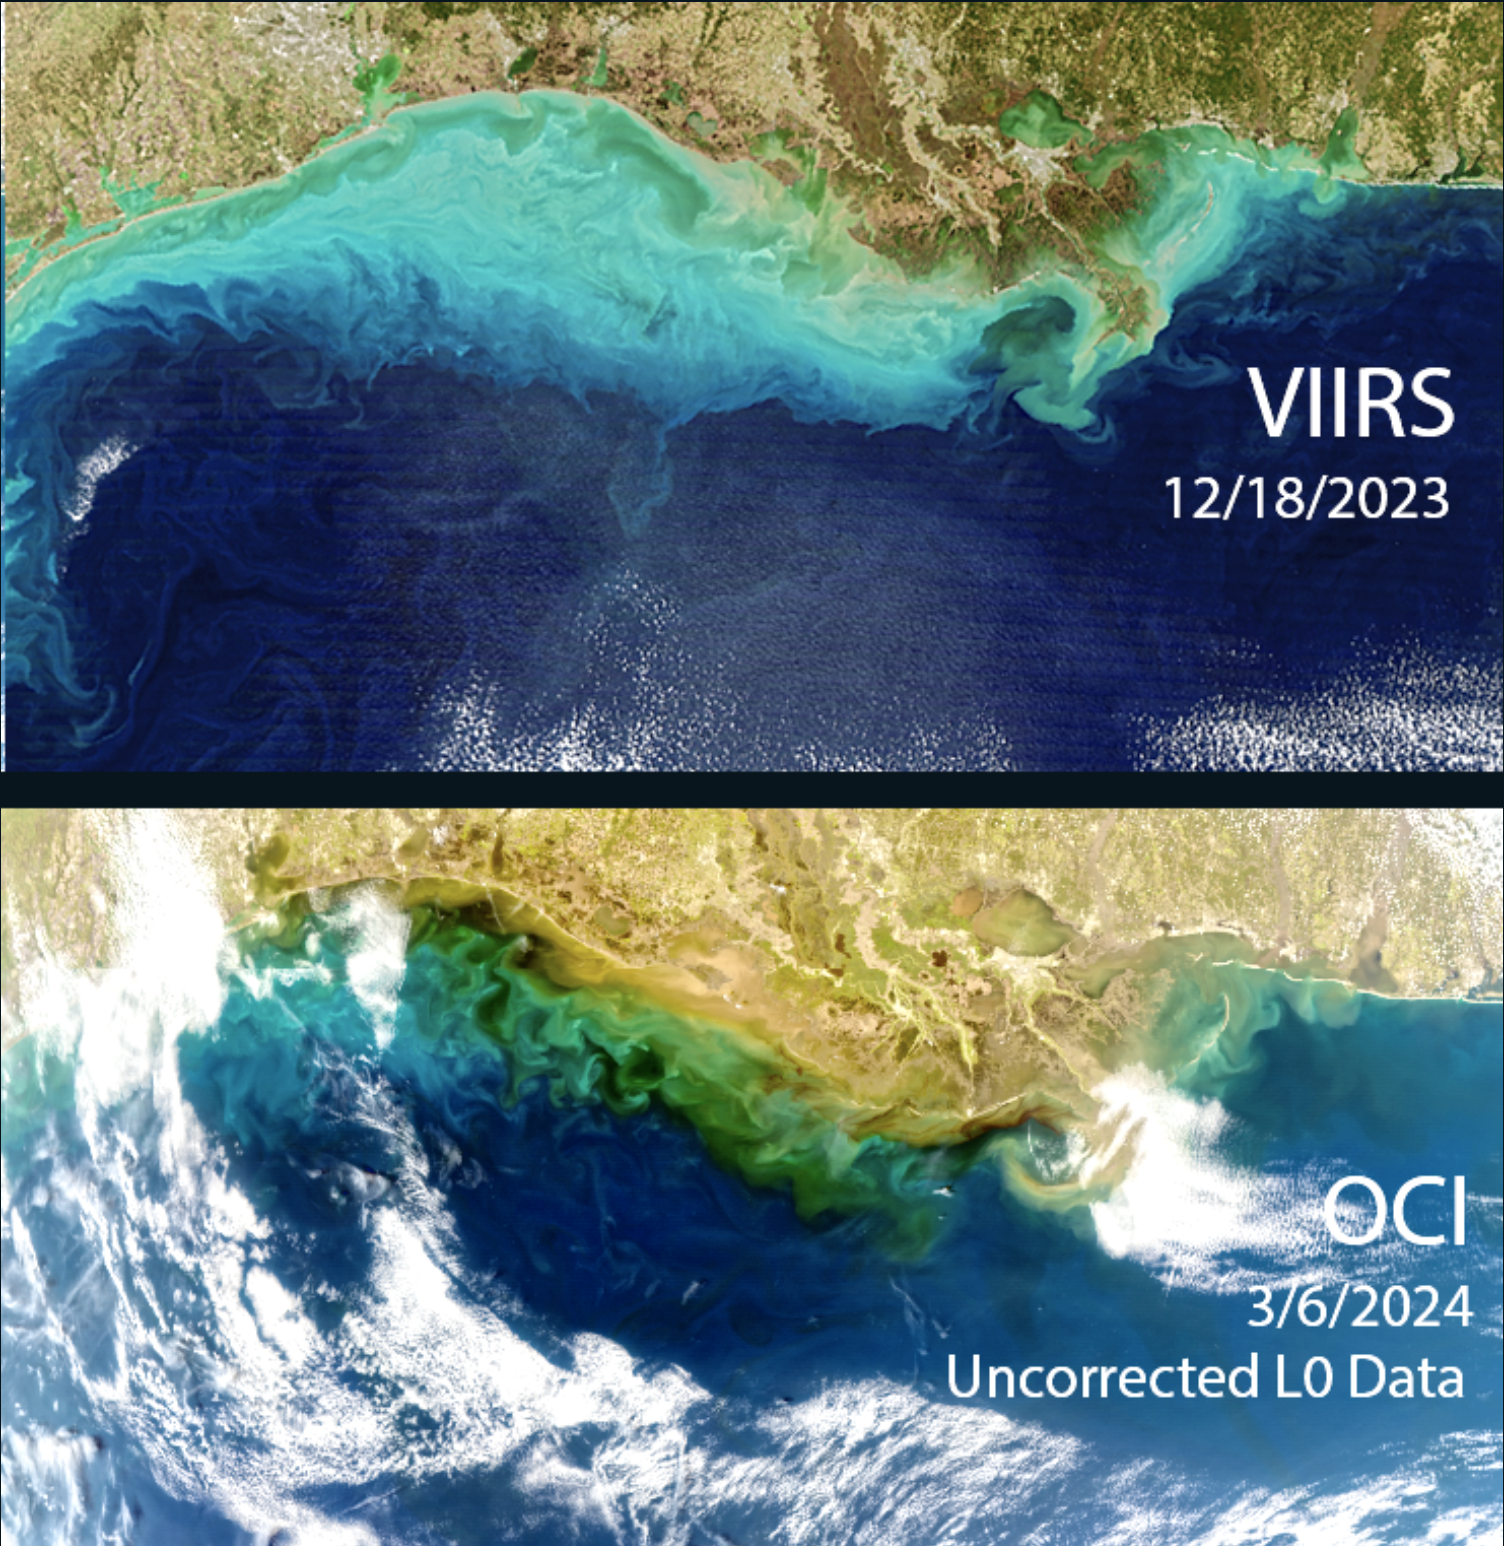 PACE is equipped with trailblazing technology that sets it apart from other Earth-observing satellites. The bottom image depicts the level of detail in a Mississippi River plume captured by PACE compared to another satellite instrument a few months prior. PHOTO CREDIT: NASA.